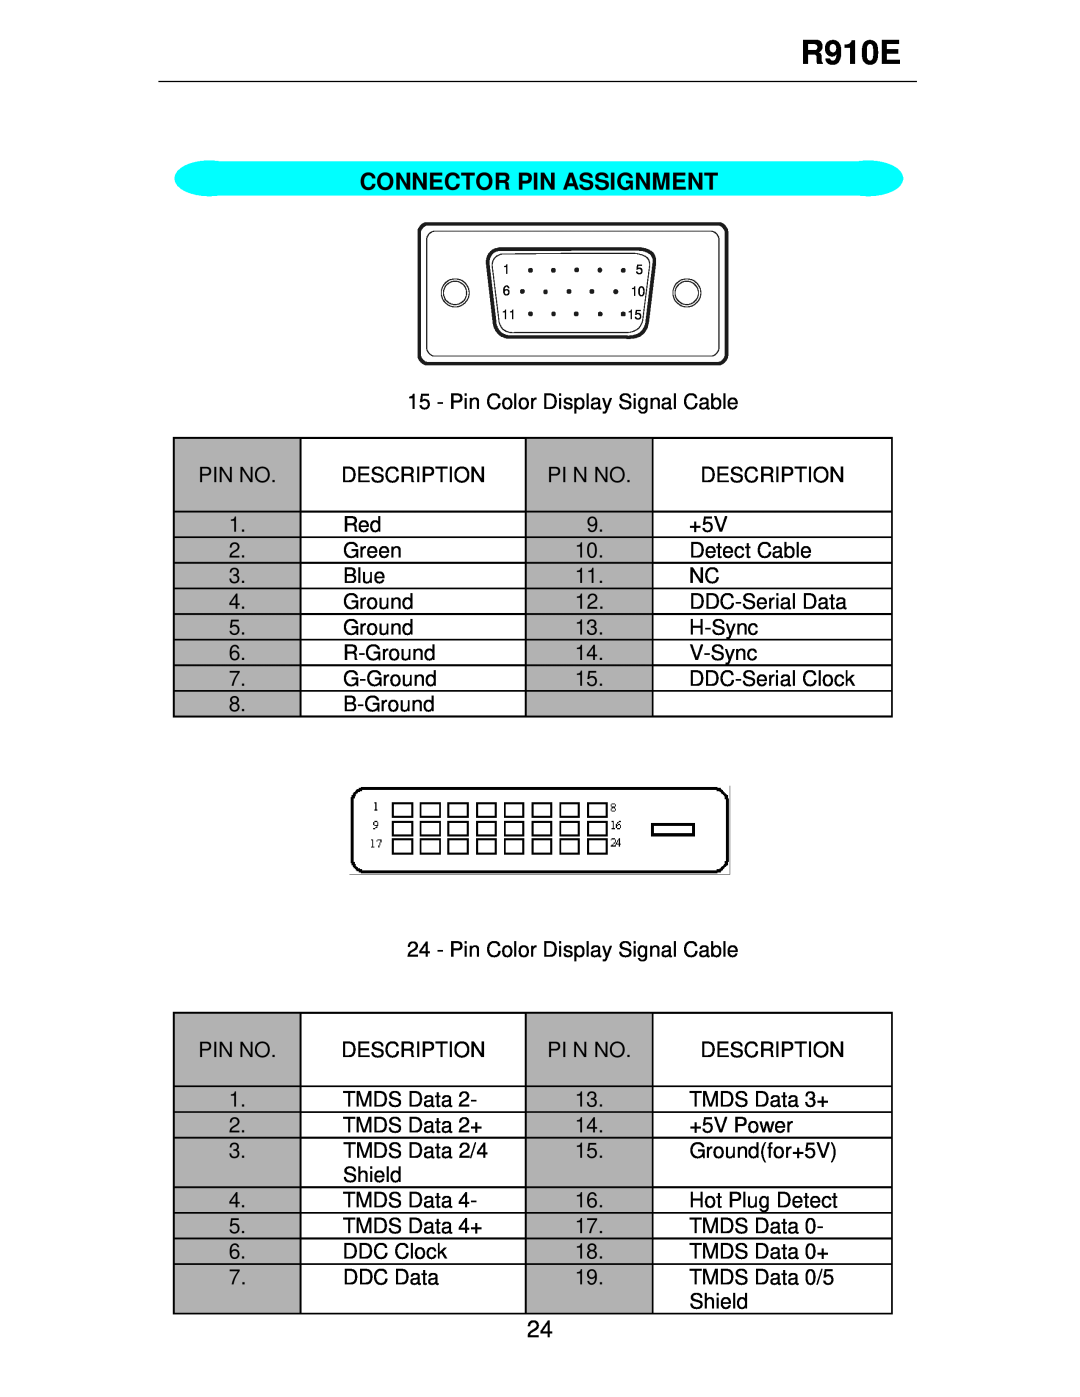 Rosewill R910E user manual Connector Pin Assignment, DDC-Serial Clock 